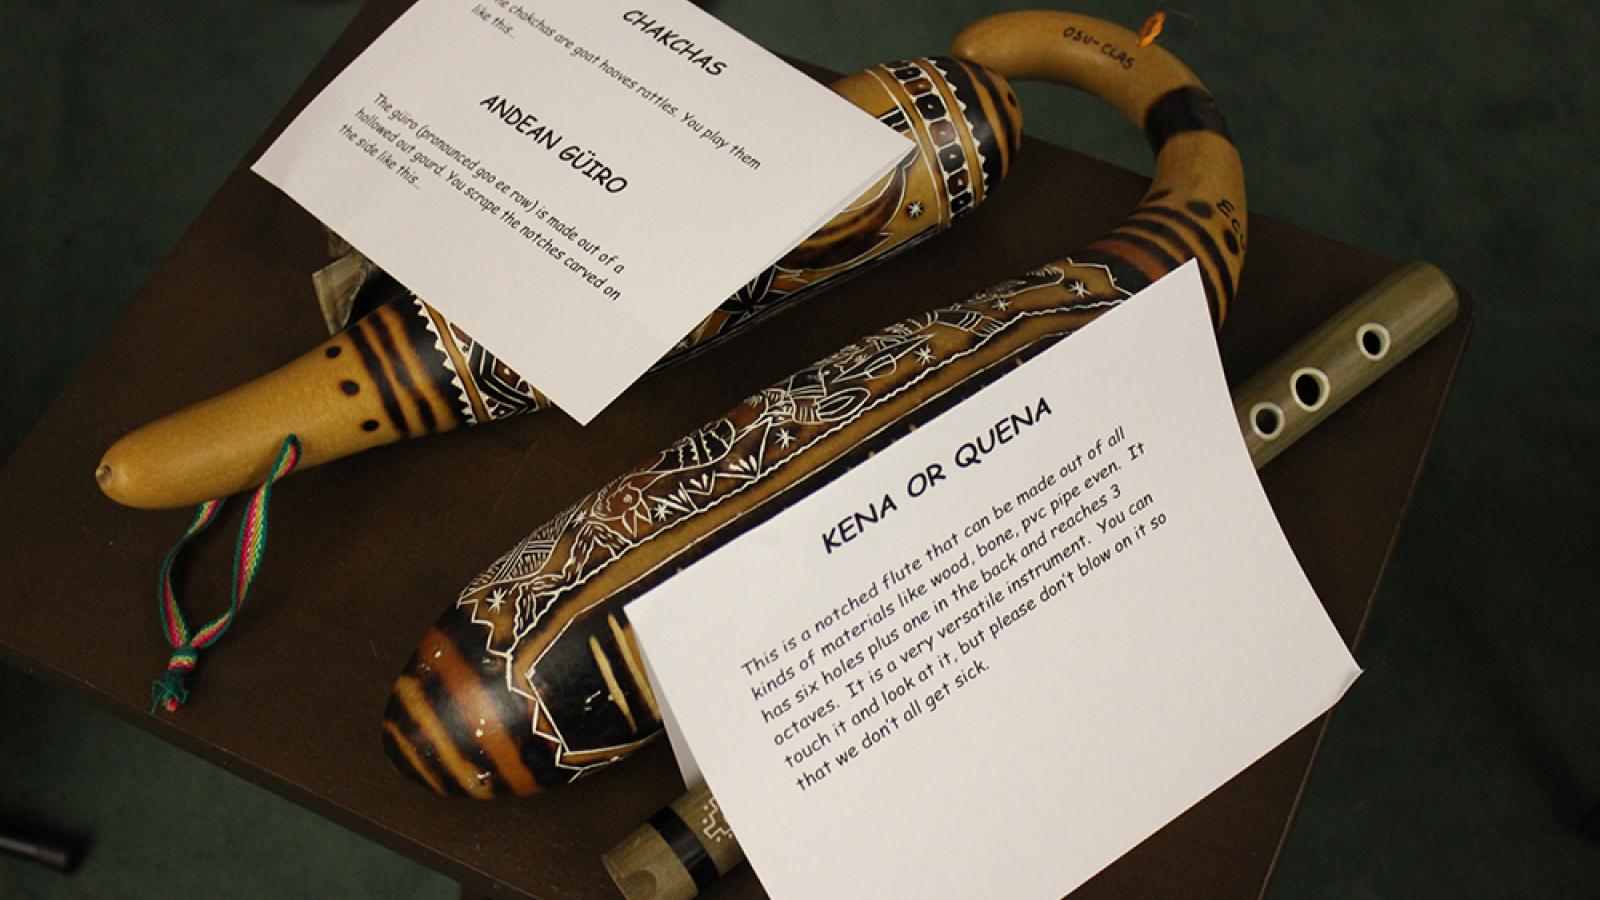 Instruments: Kena/Quena (notched mouthpiece flutes), Chakchas (goat hooves rattles)